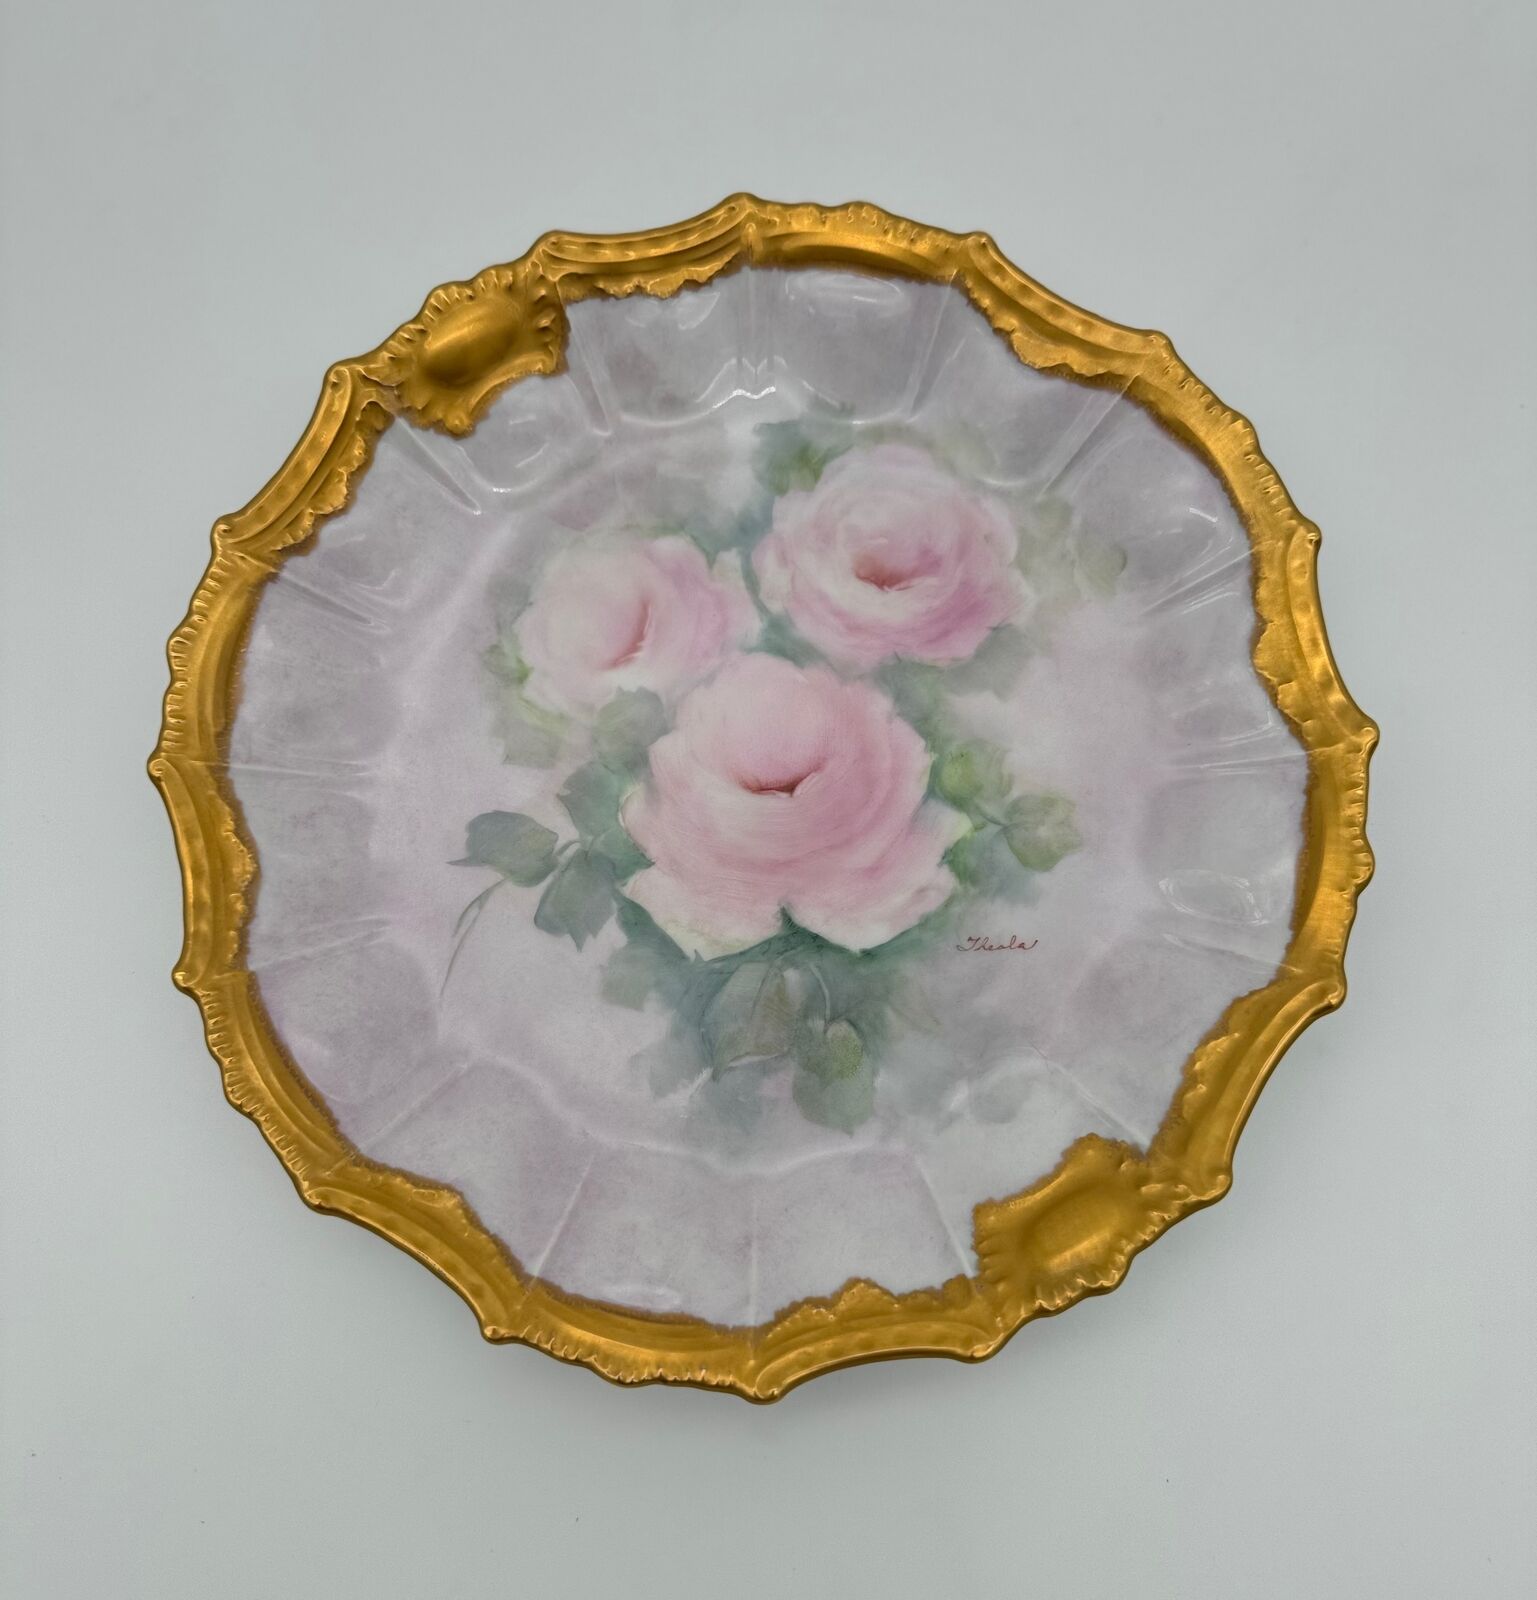 Antique Limoges Hand-Painted Pink Roses Plate Signed by Theola with Gold Trim